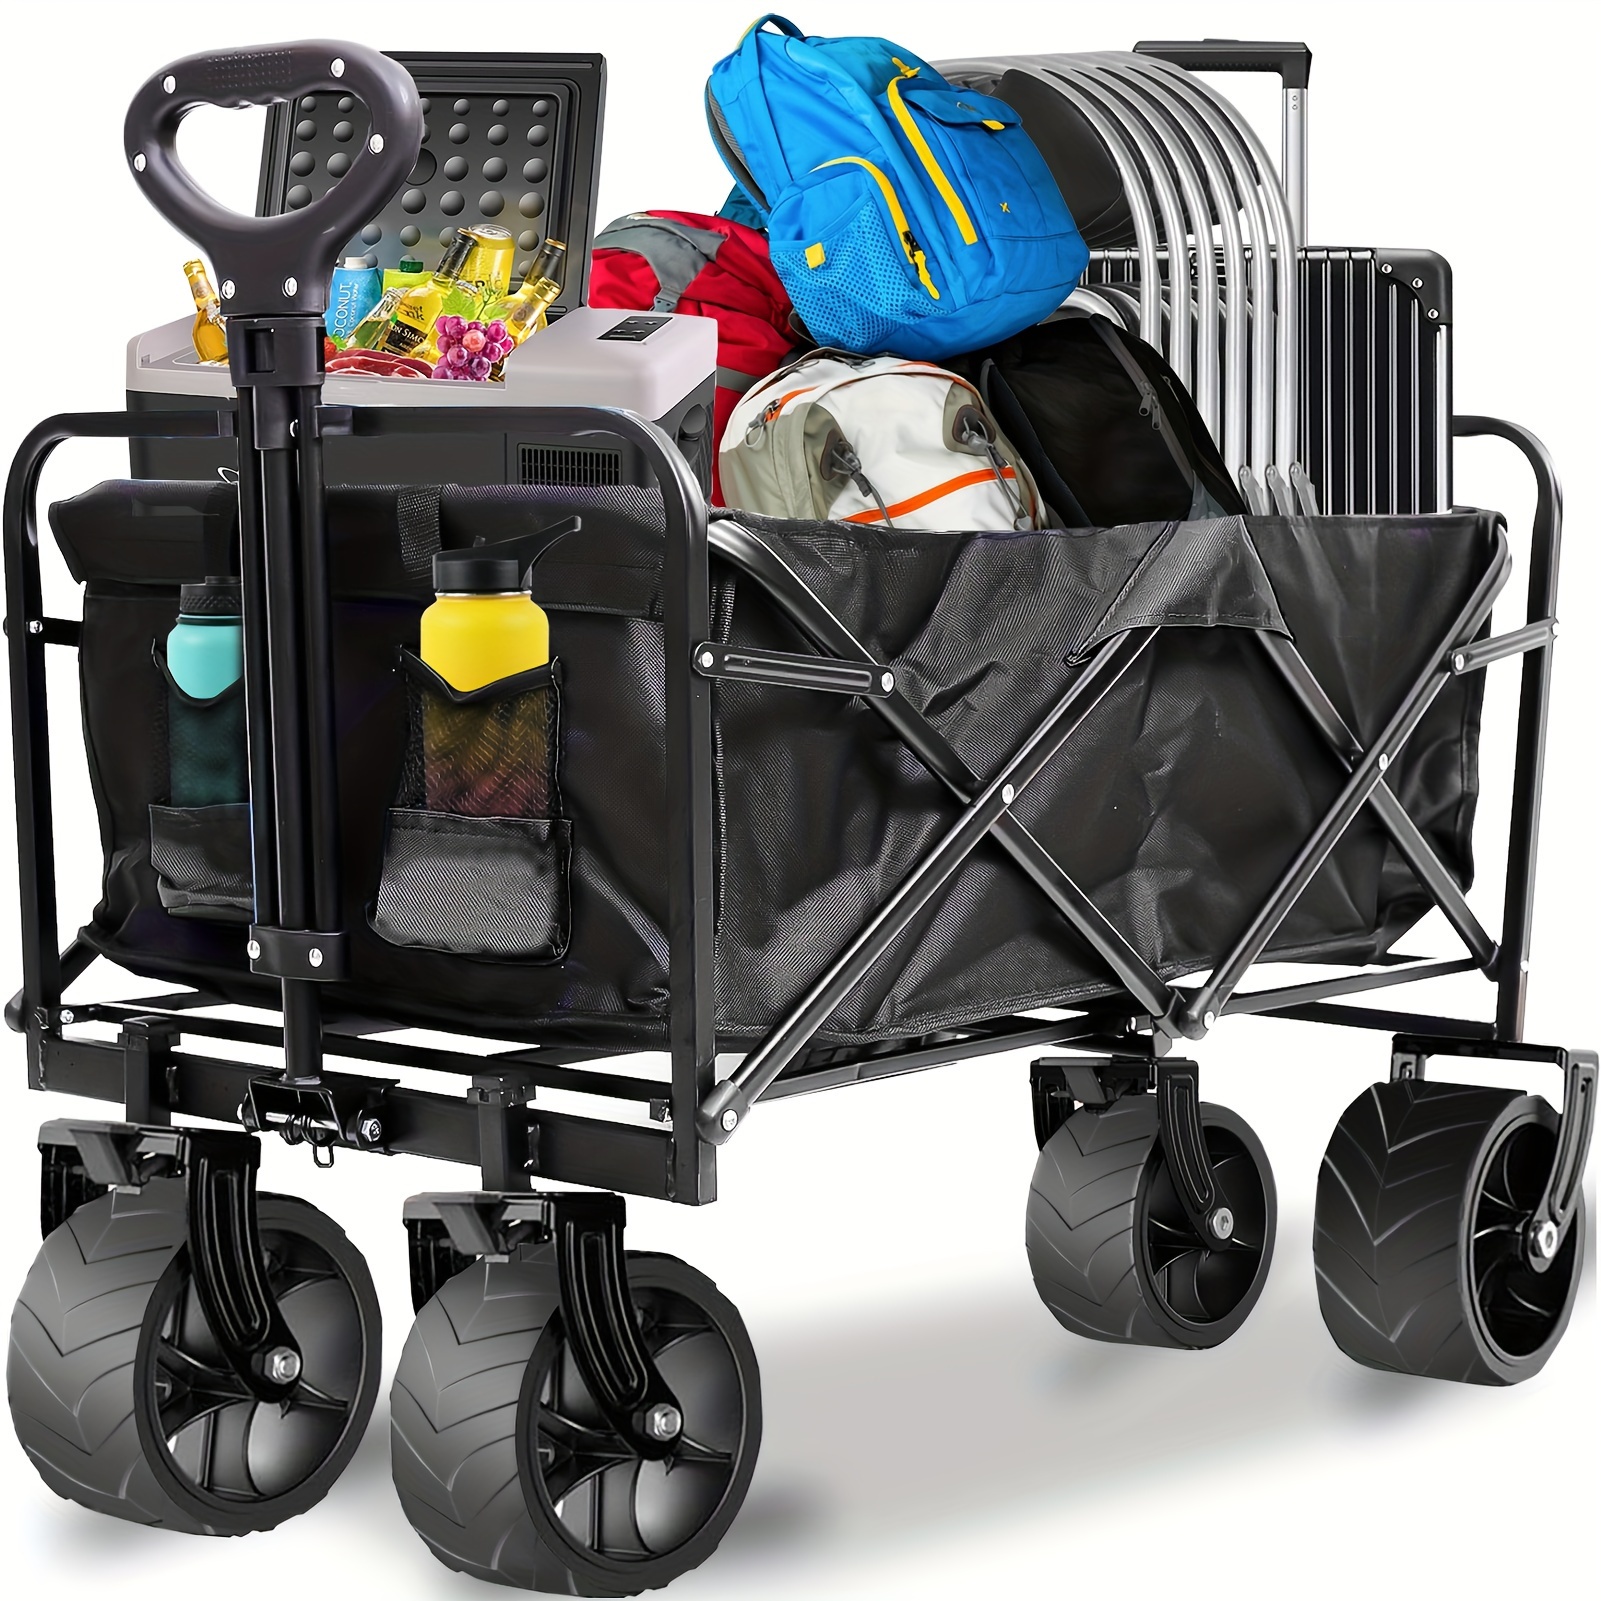 

Collapsible Folding Wagon Cart, 120l Heavy Duty Utility Cart With 350lbs Capacity - Ideal For Grocery, Shopping, Camping, And Beach Trips - All Terrain Wheels